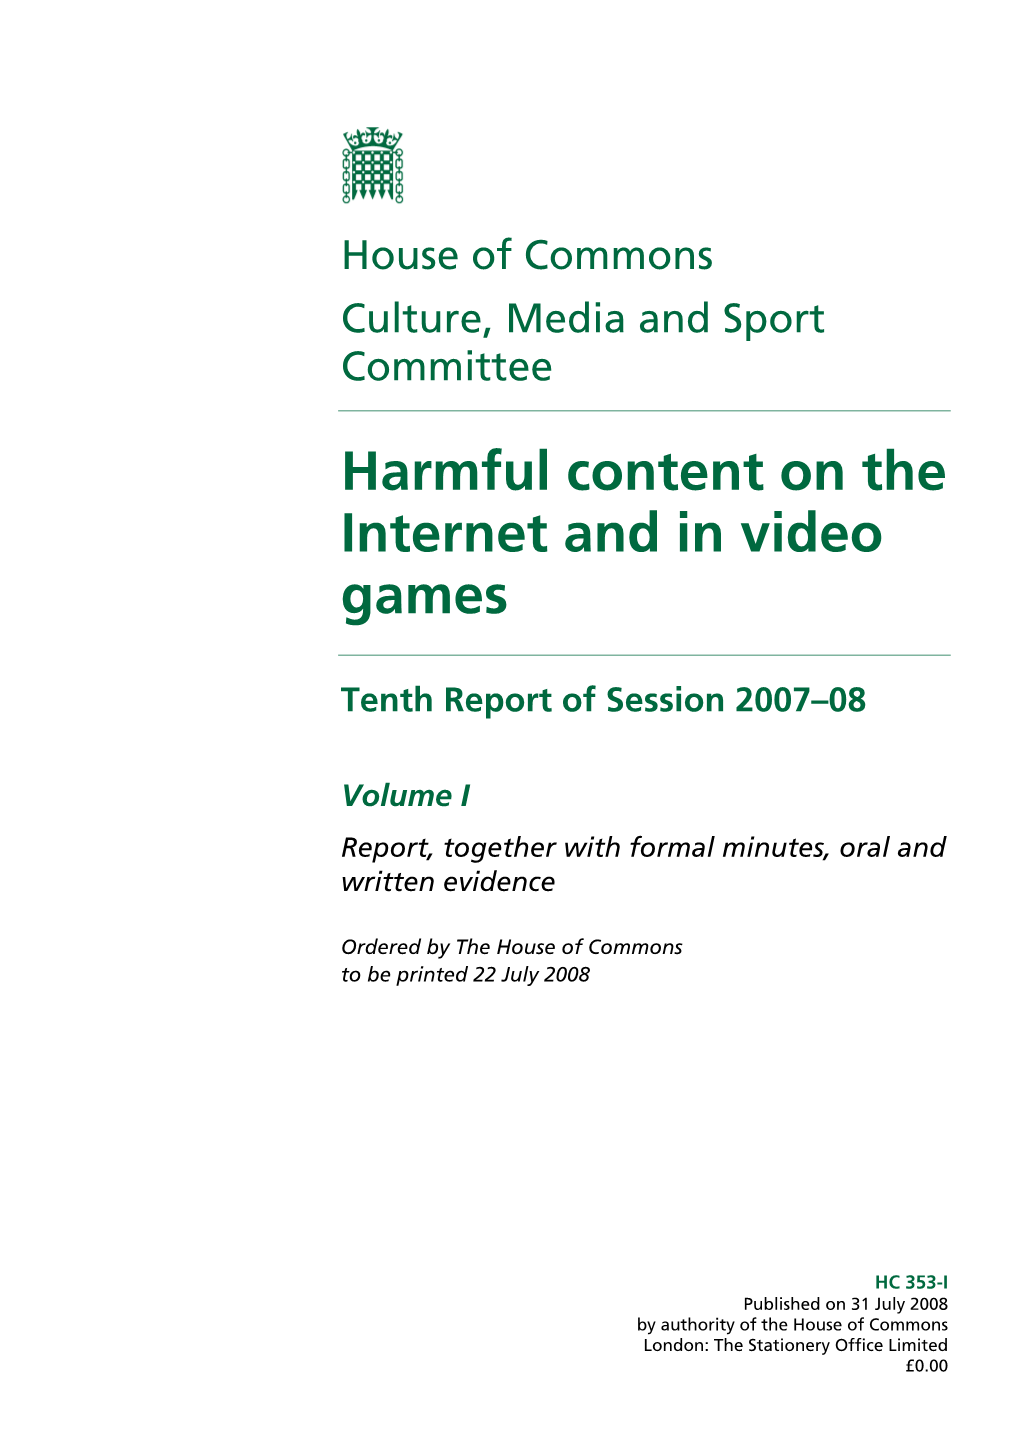 Harmful Content on the Internet and in Video Games